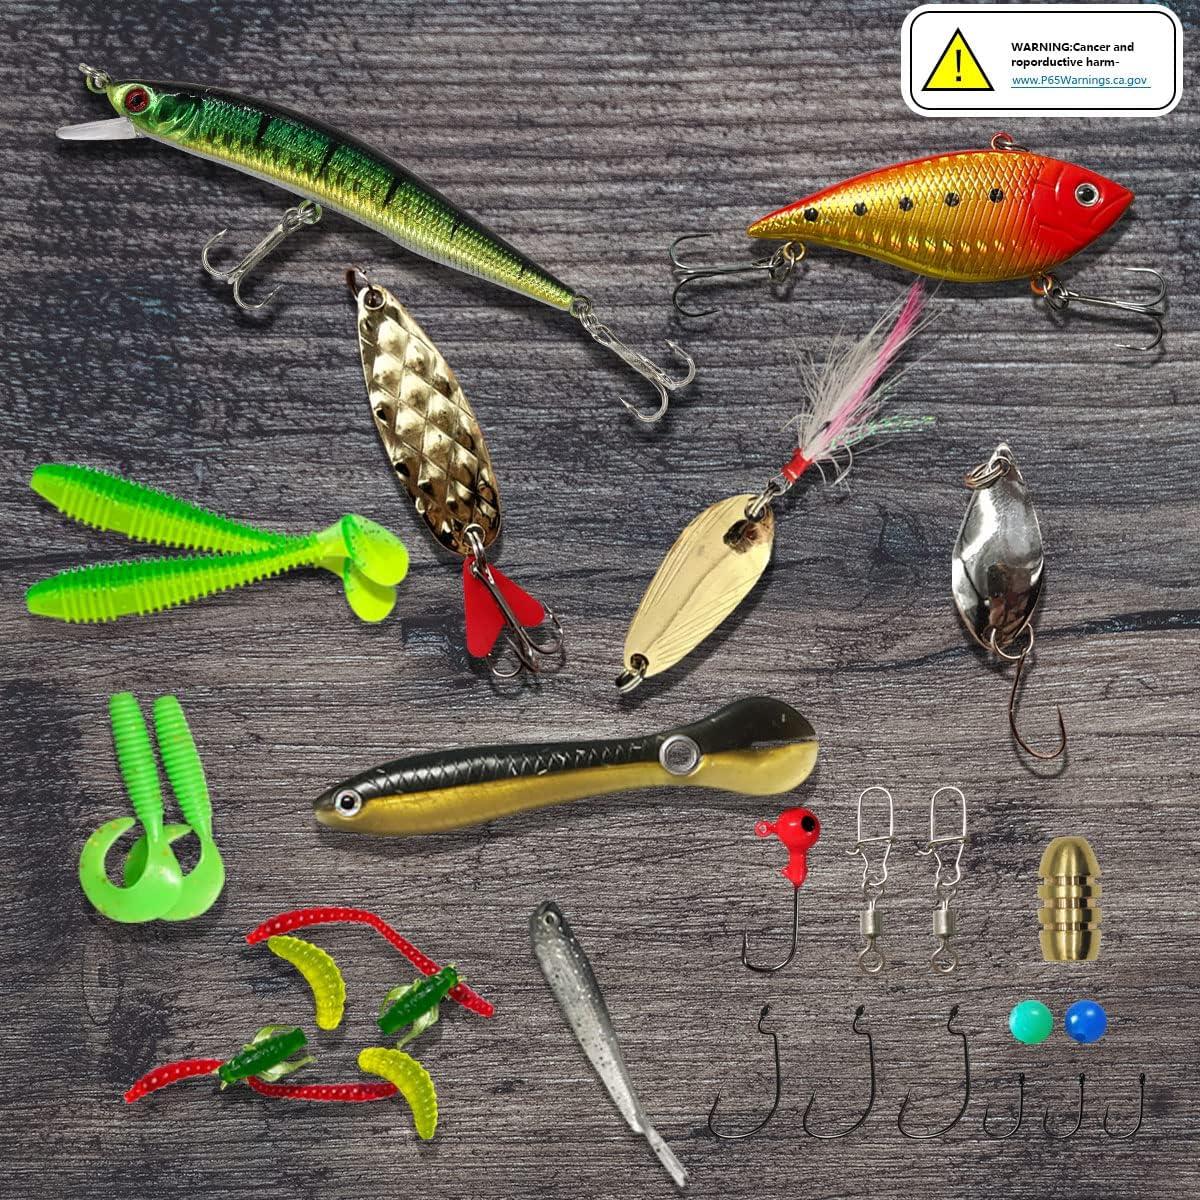 Bass Fishing Lure,65Pcs Soft Worm Bait Fishing Lures Kit with Rubber O  Ring,Artificial Soft Lure Baits for Bass Fishing